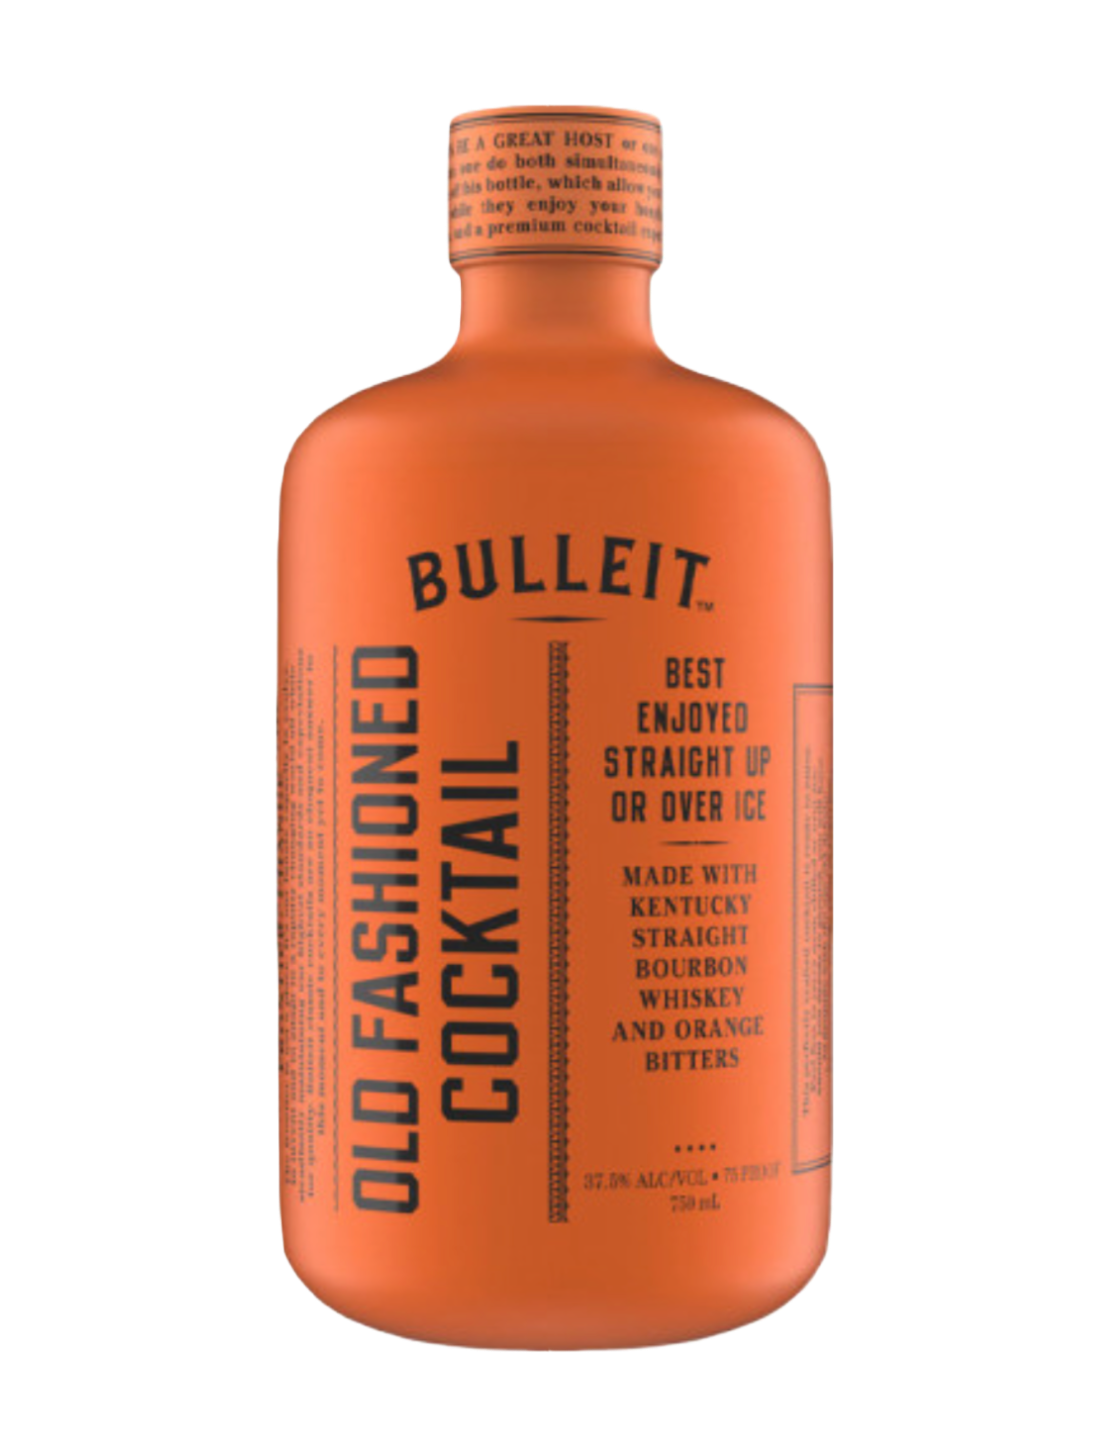 Bottle of Bulleit Old Fashioned Cocktail in front of a plain white background